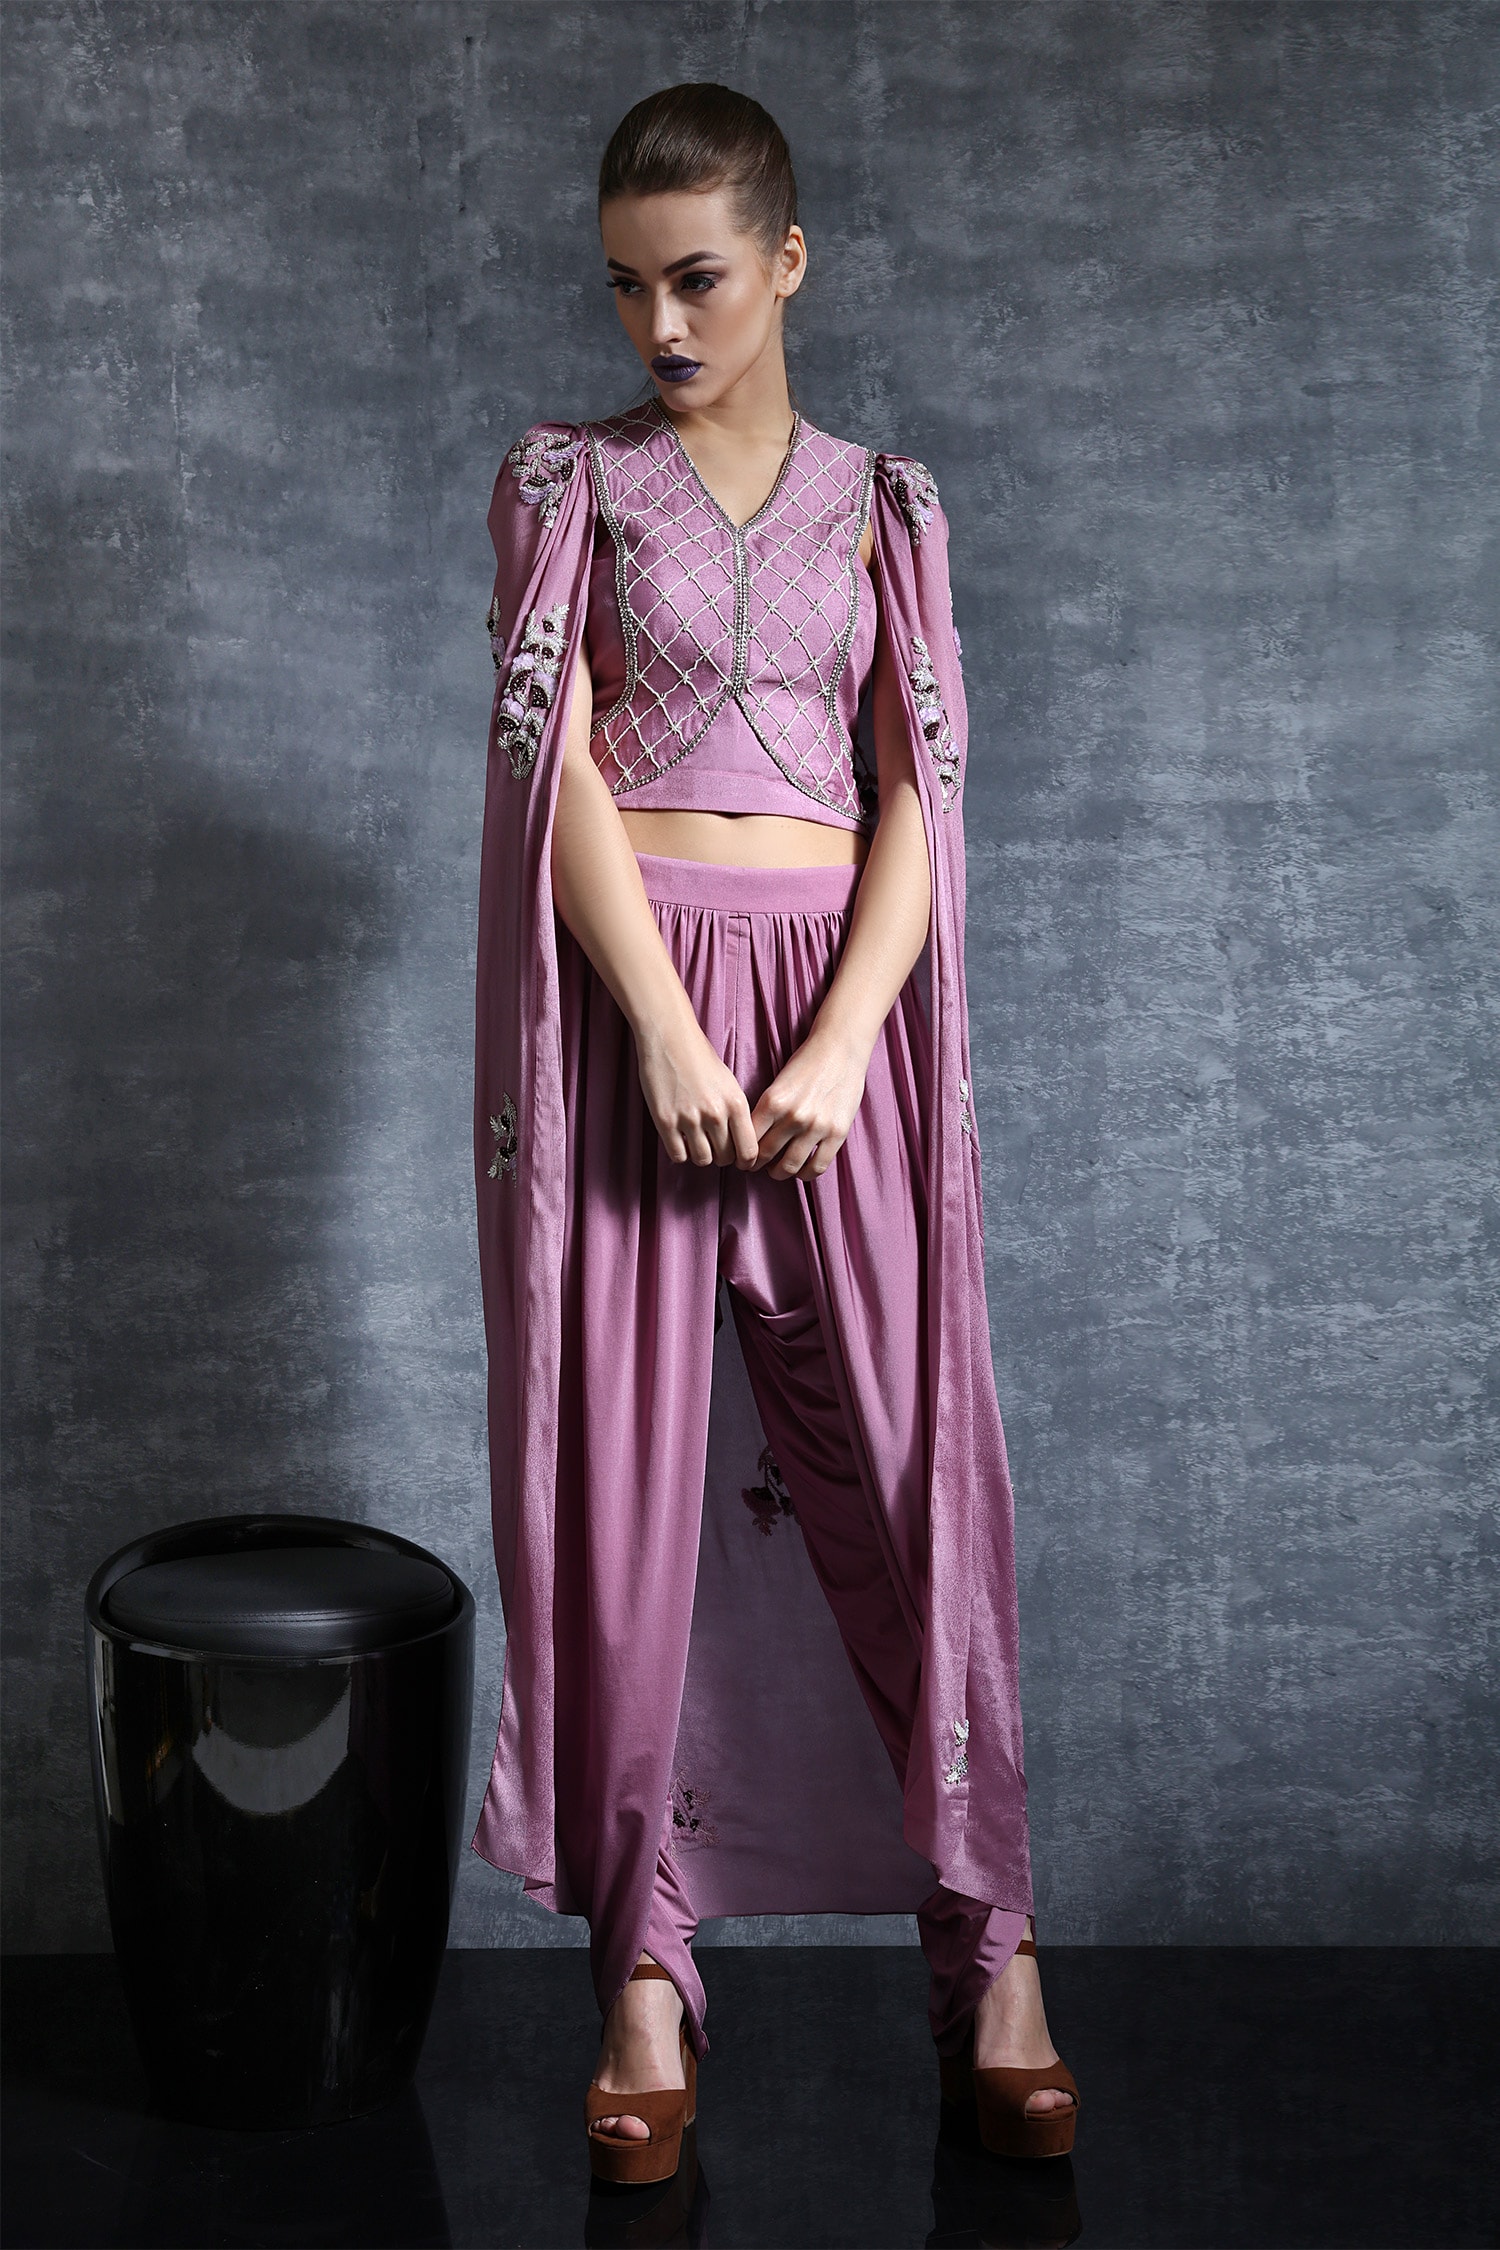 INDYA Dhoti pants outlet - 1800 products on sale | FASHIOLA.co.uk